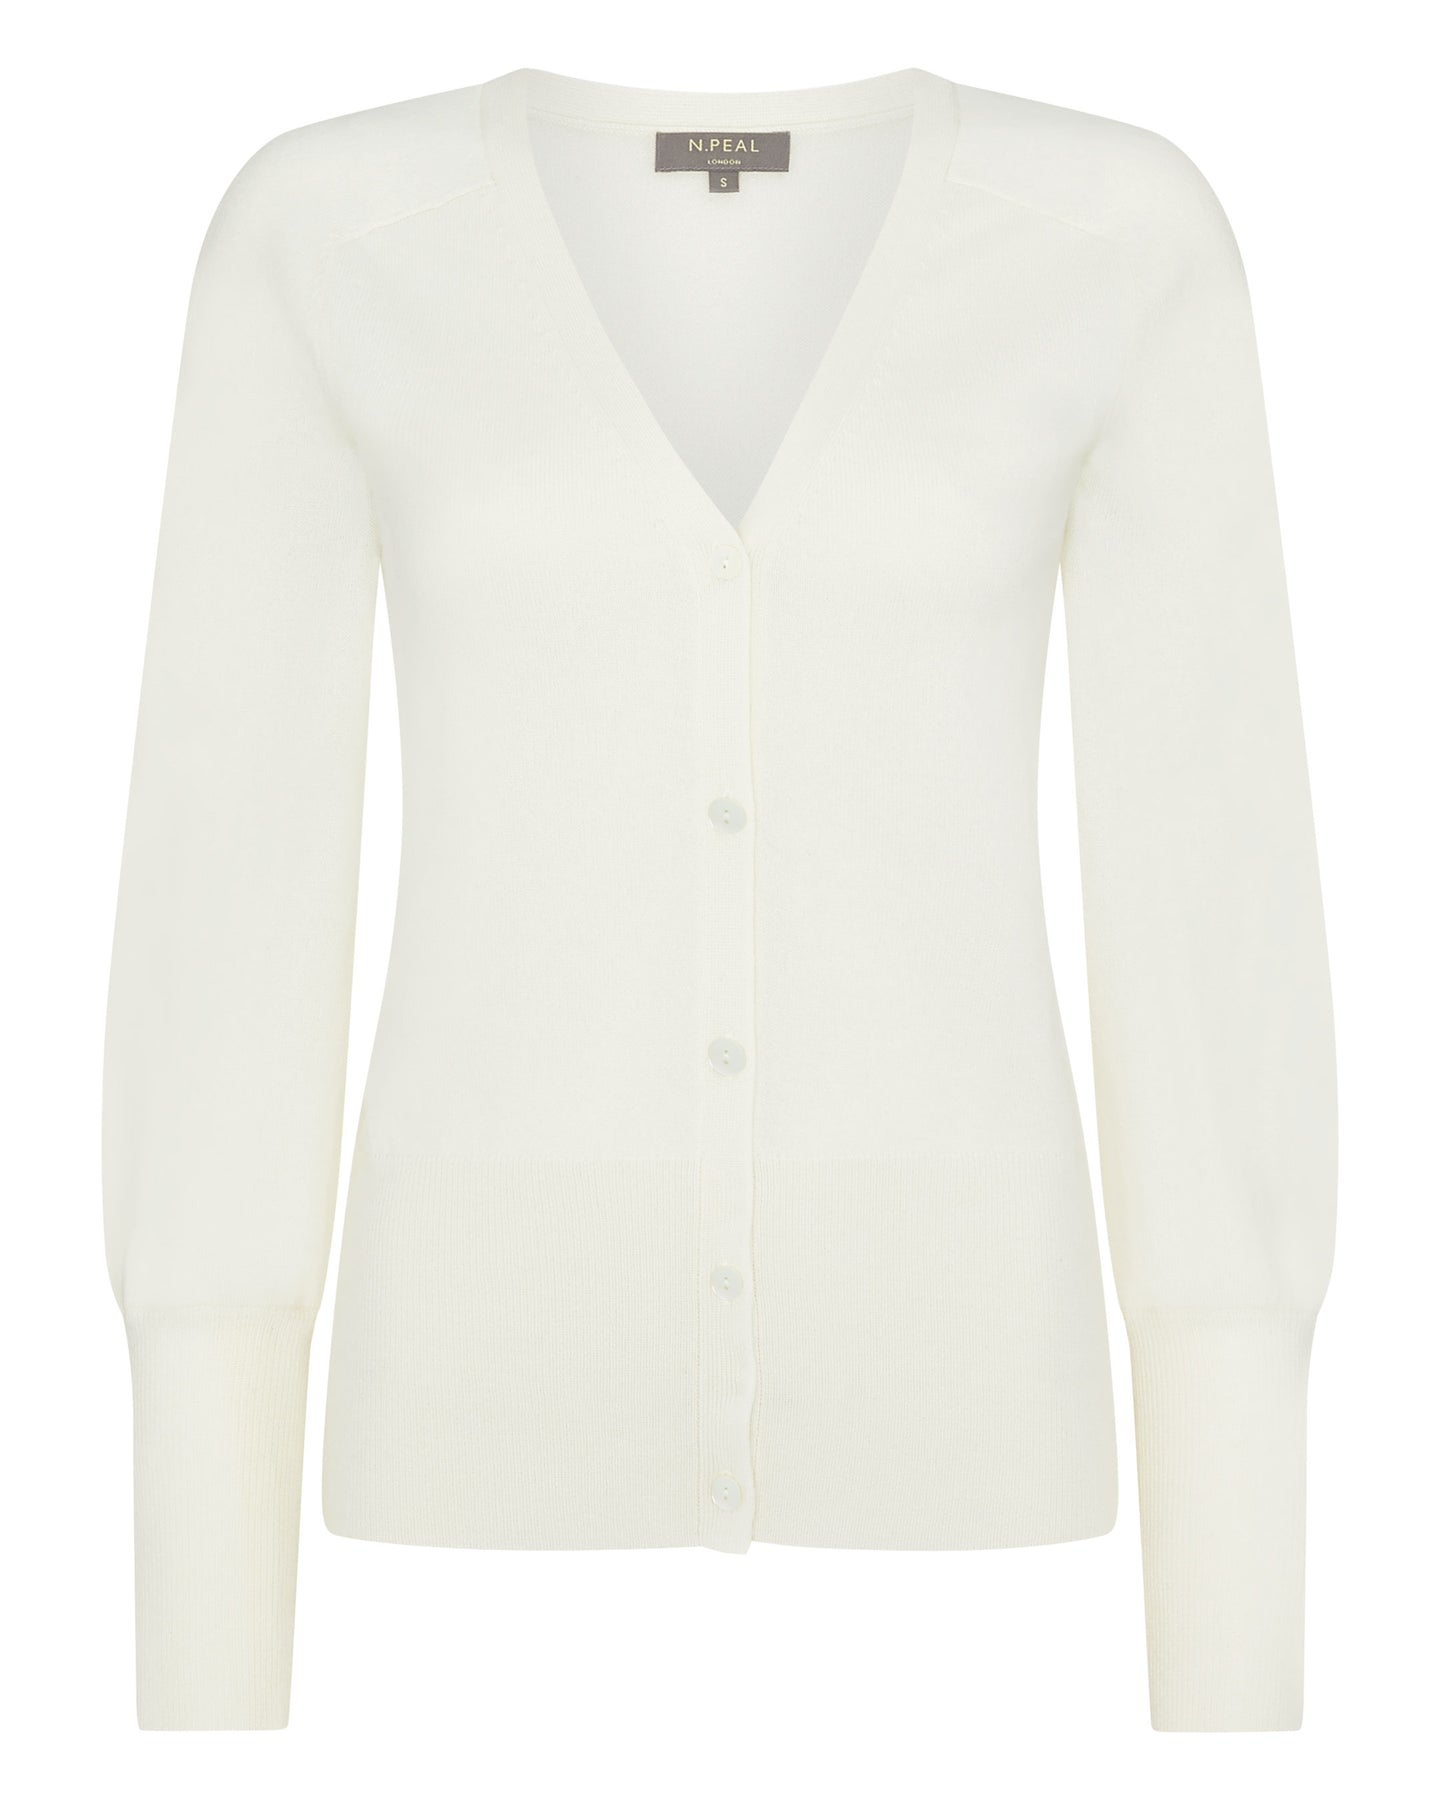 N.Peal Women's V Necked Cashmere Cardigan New Ivory White